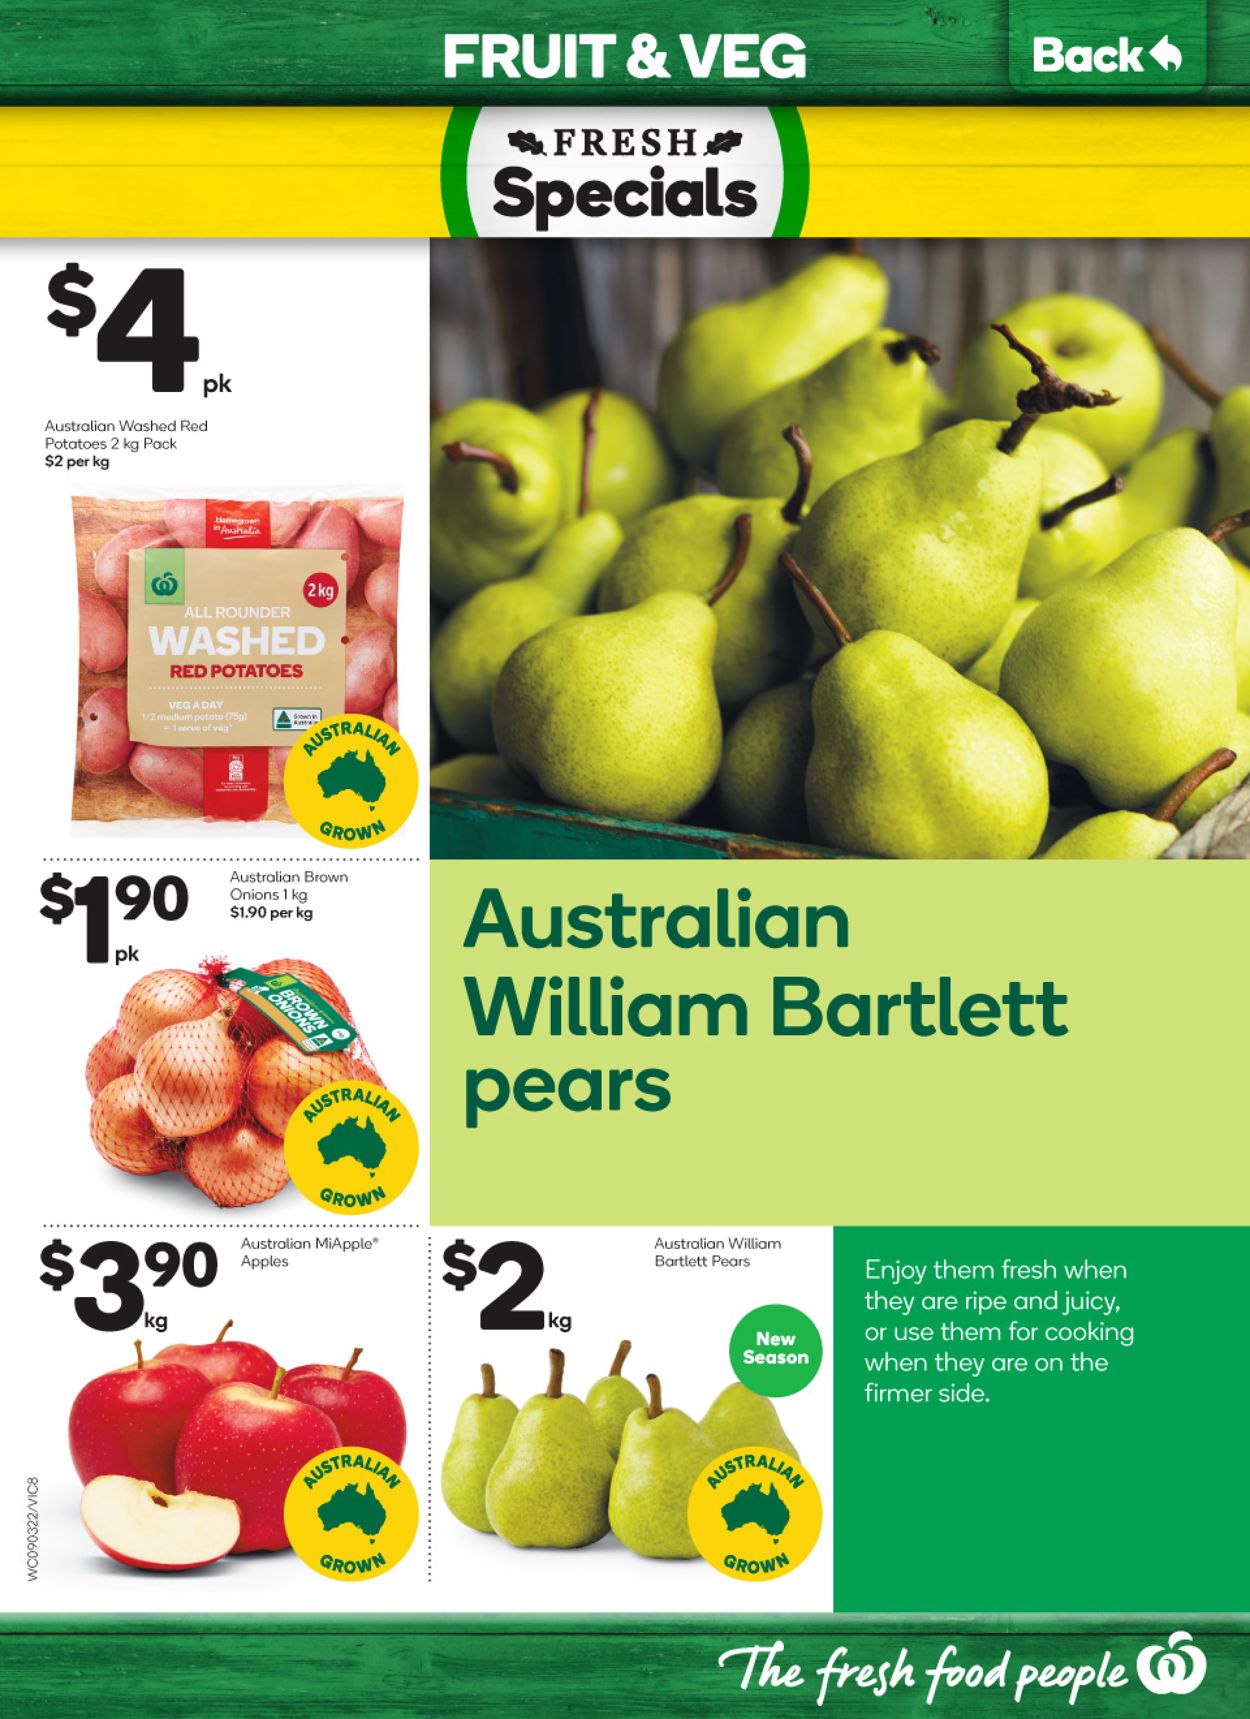 Woolworths Catalogue - 09/03-15/03/2022 (Page 8)